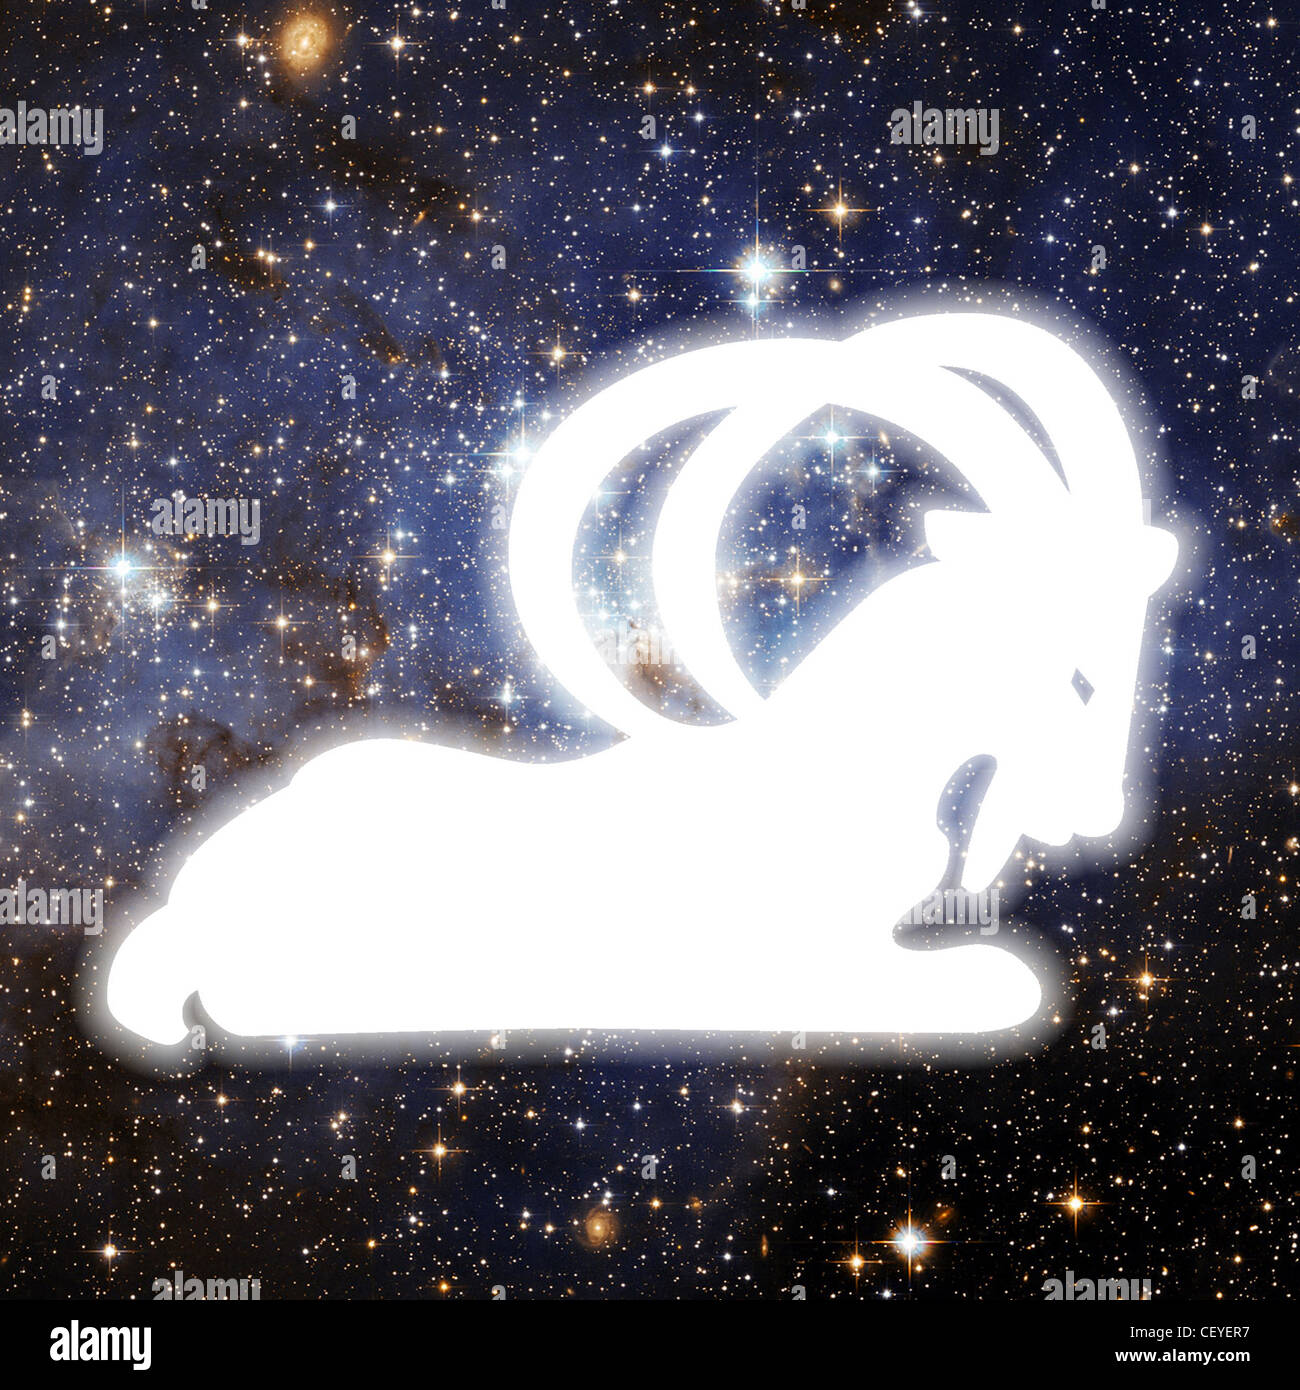 An illustration of a white silhouetted resting goat, set against a background of space filled with stars Stock Photo